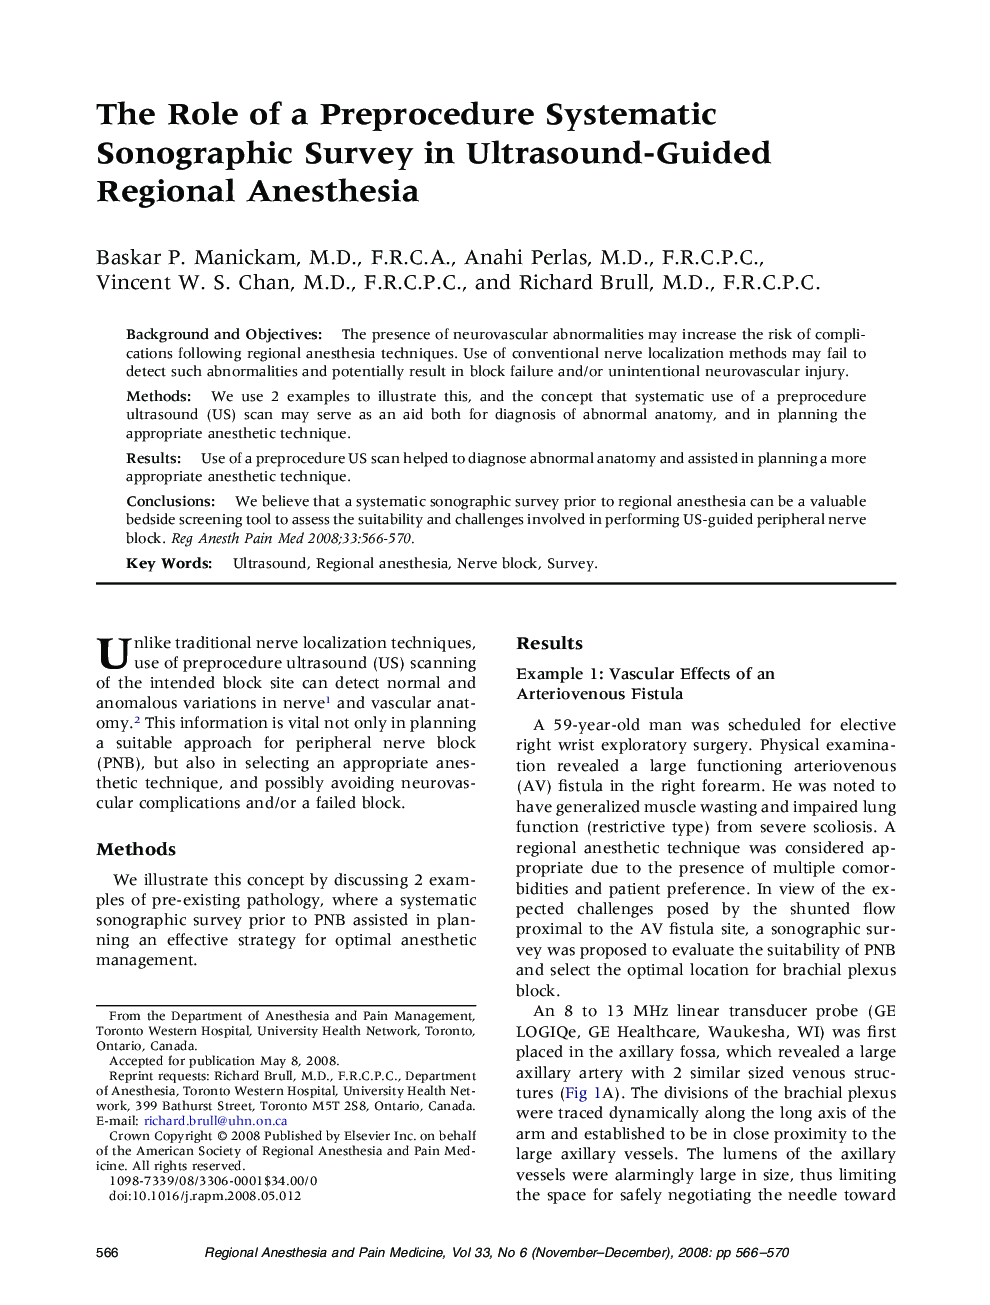 The Role of a Preprocedure Systematic Sonographic Survey in Ultrasound-Guided Regional Anesthesia